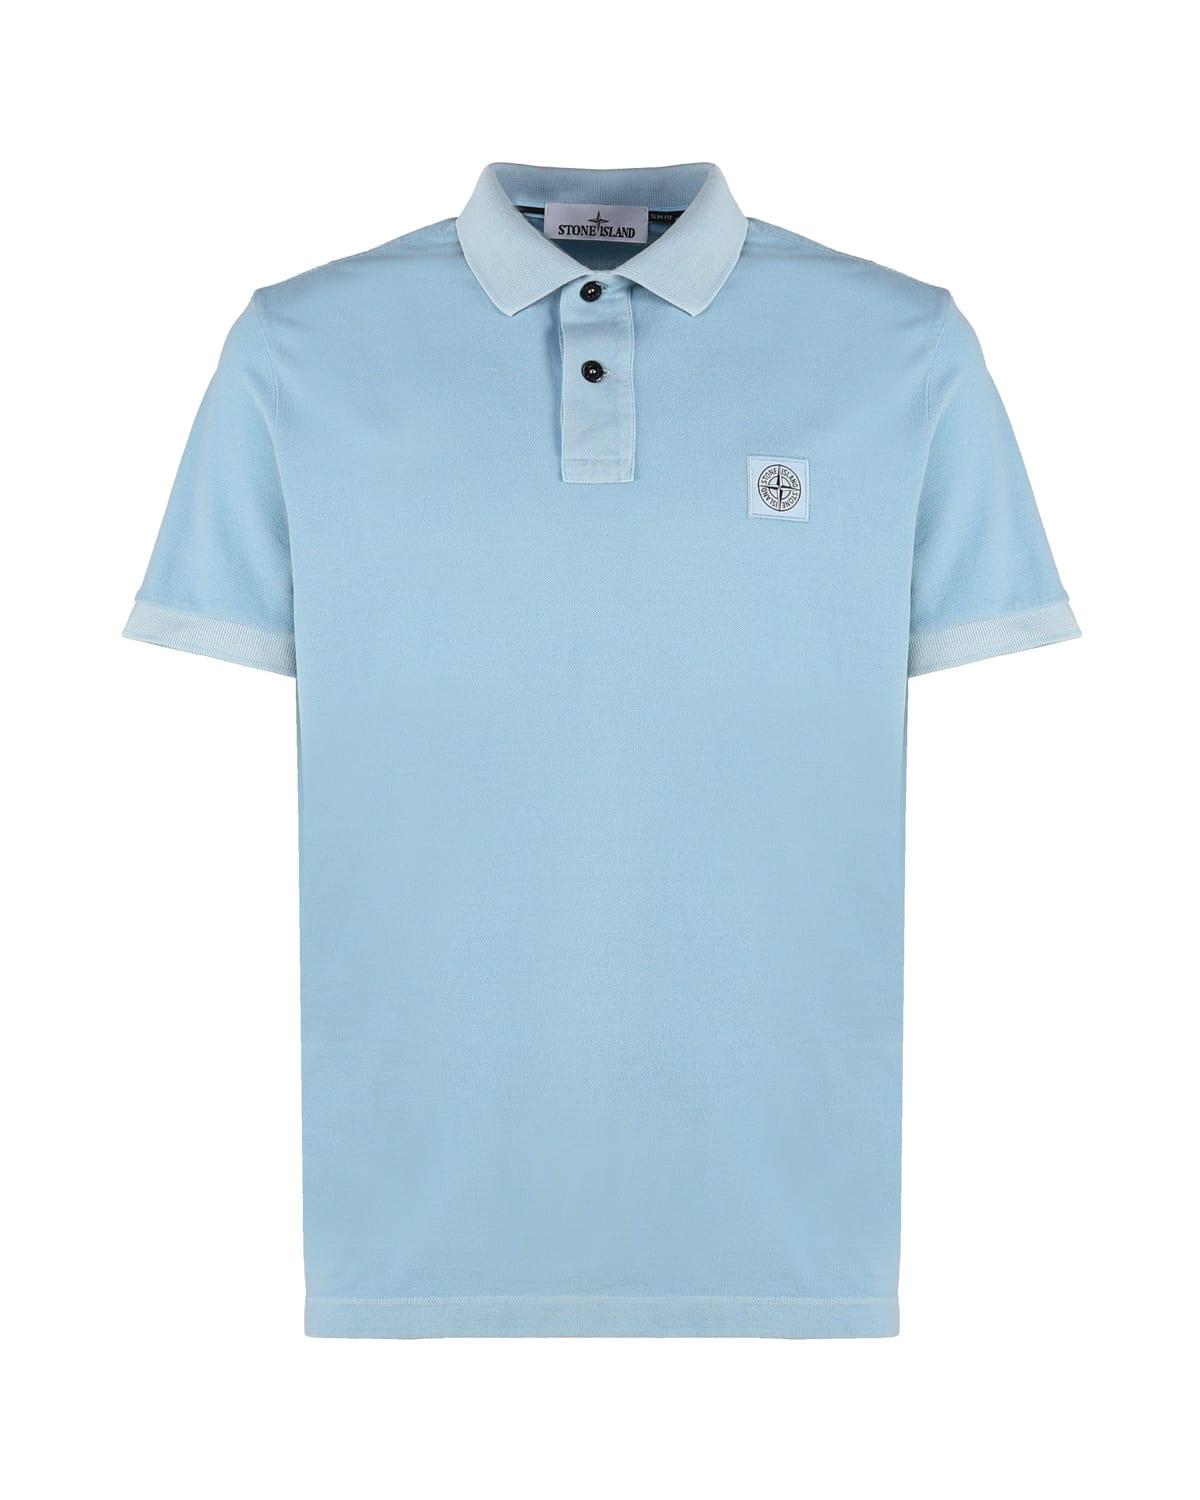 Stone Island Classic Light Blue Polo Shirt With Patch for Men | Lyst